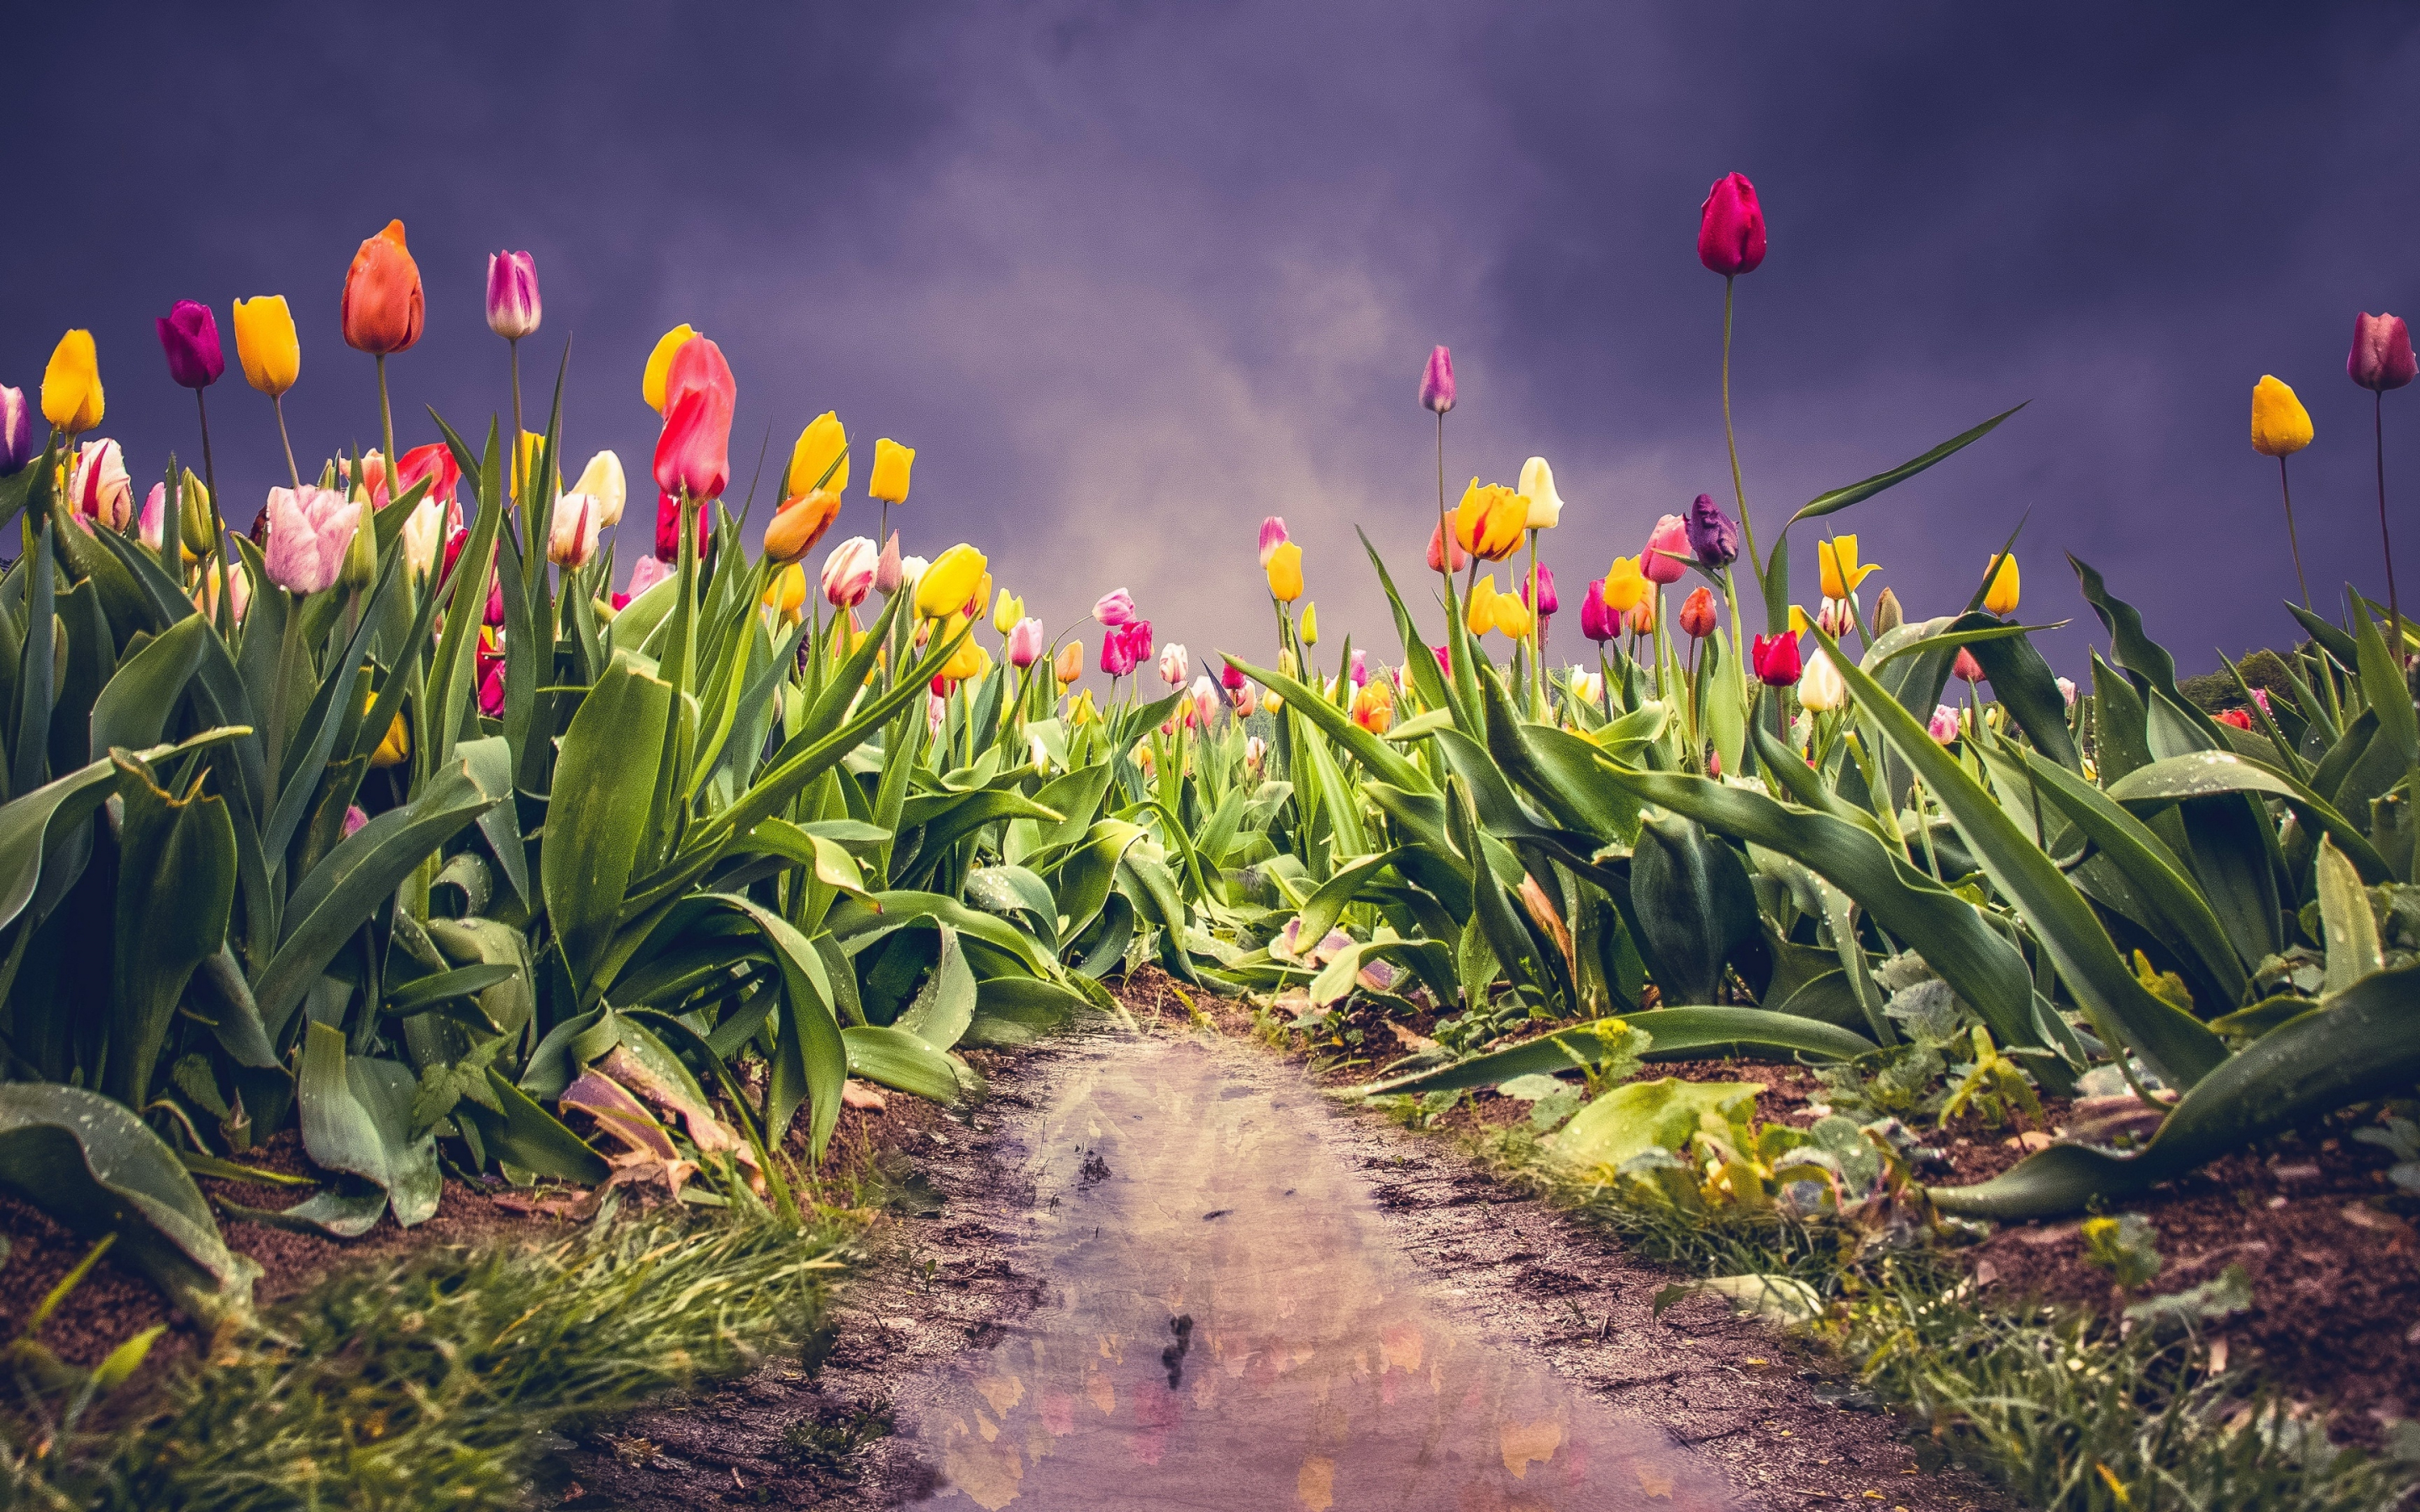 Farm of tulips, pink-yellow flowers, colorful, 2880x1800 wallpaper